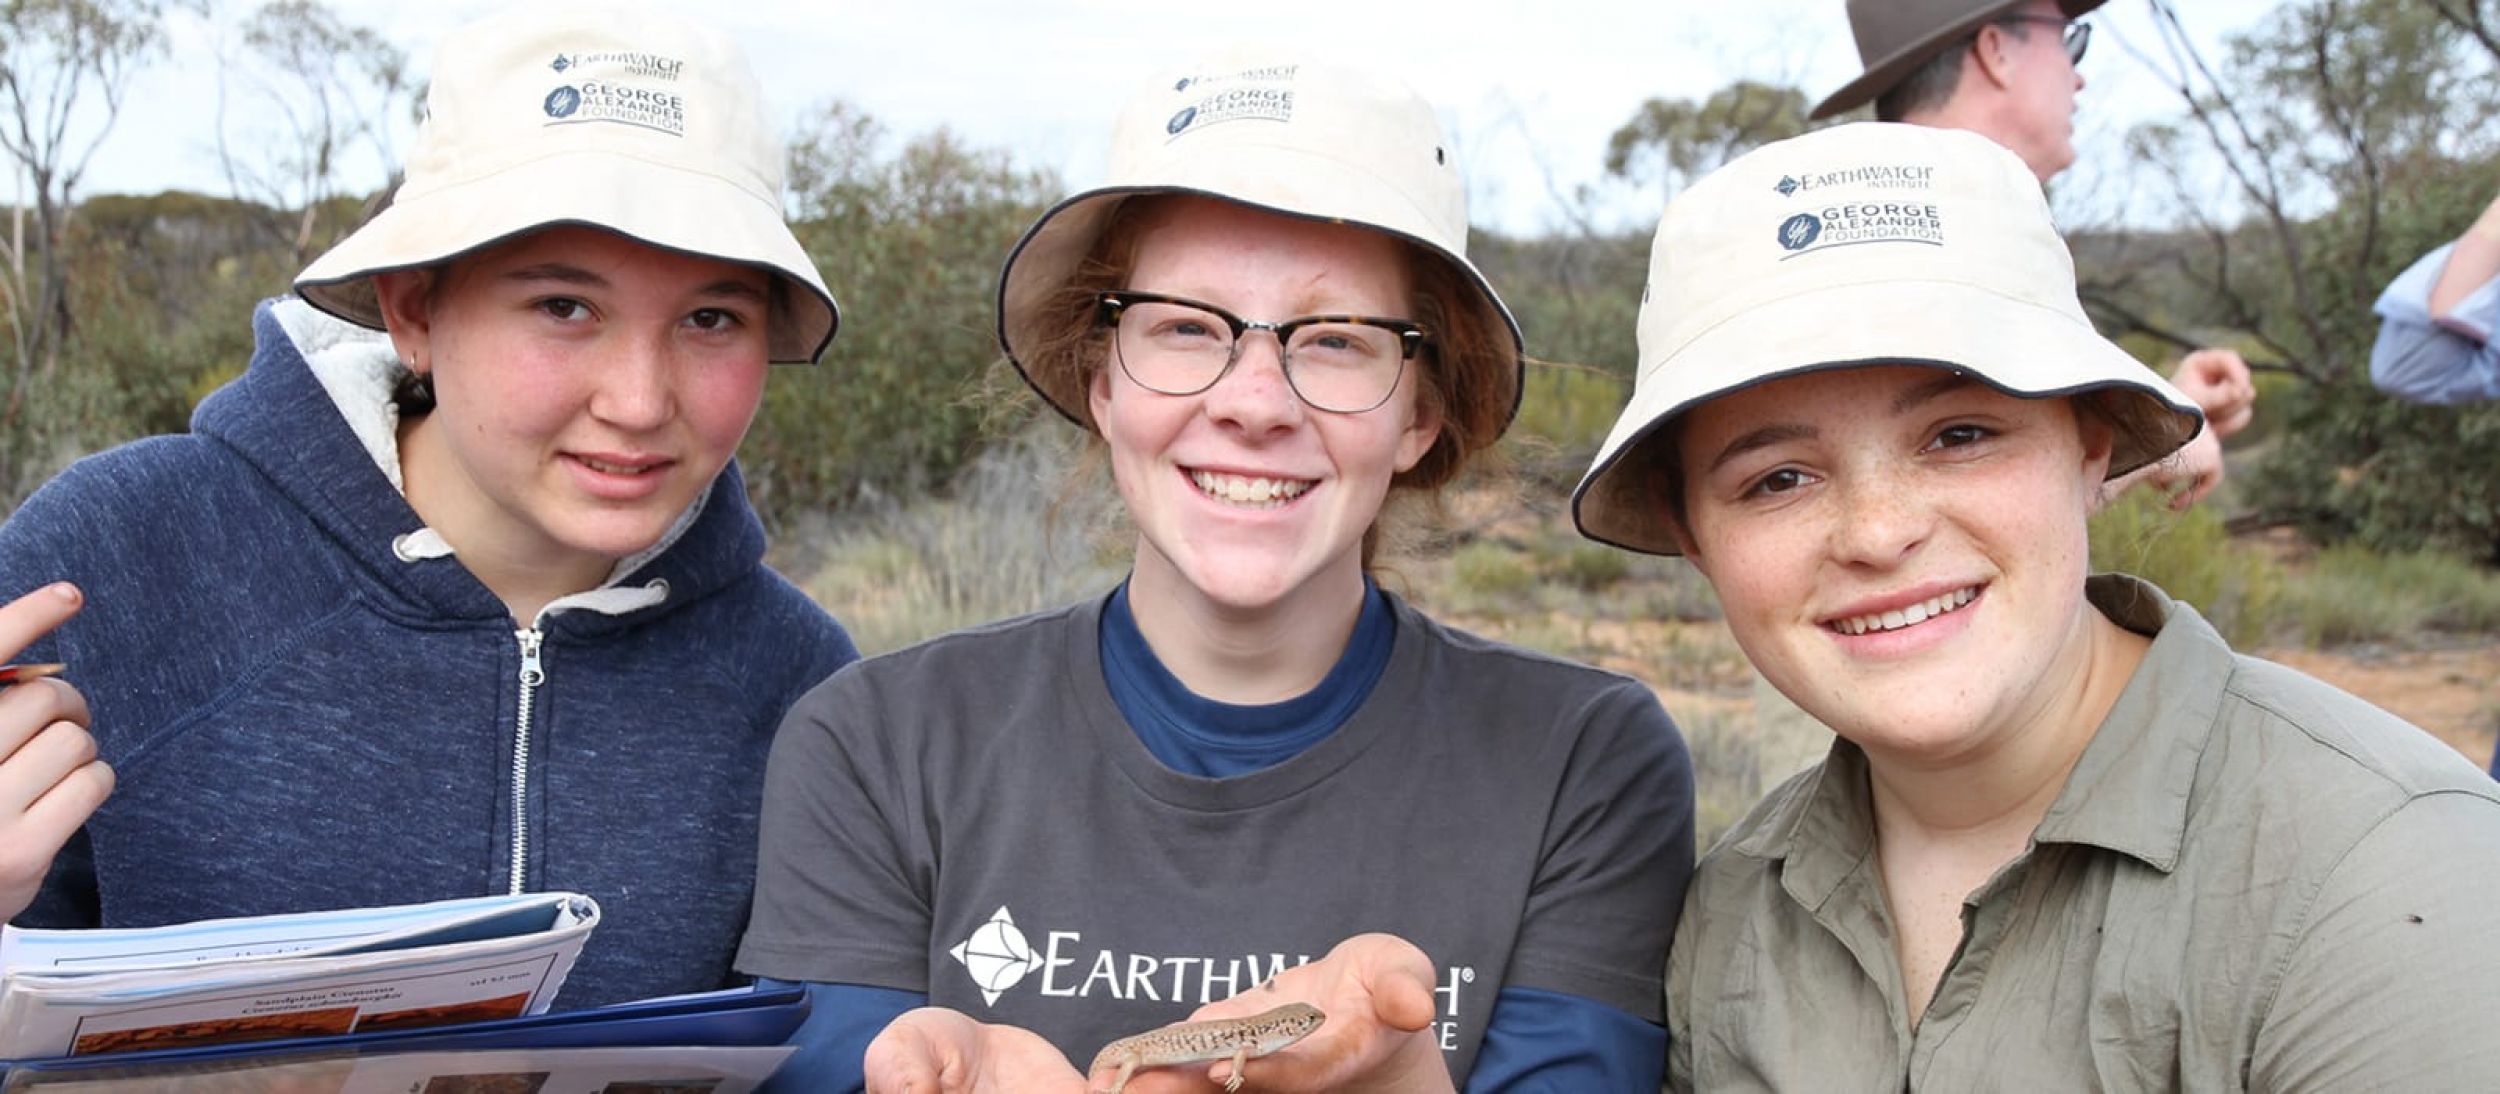 Earthwatch works with Trusts and Foundations to facilitate research and citizen science programs. 